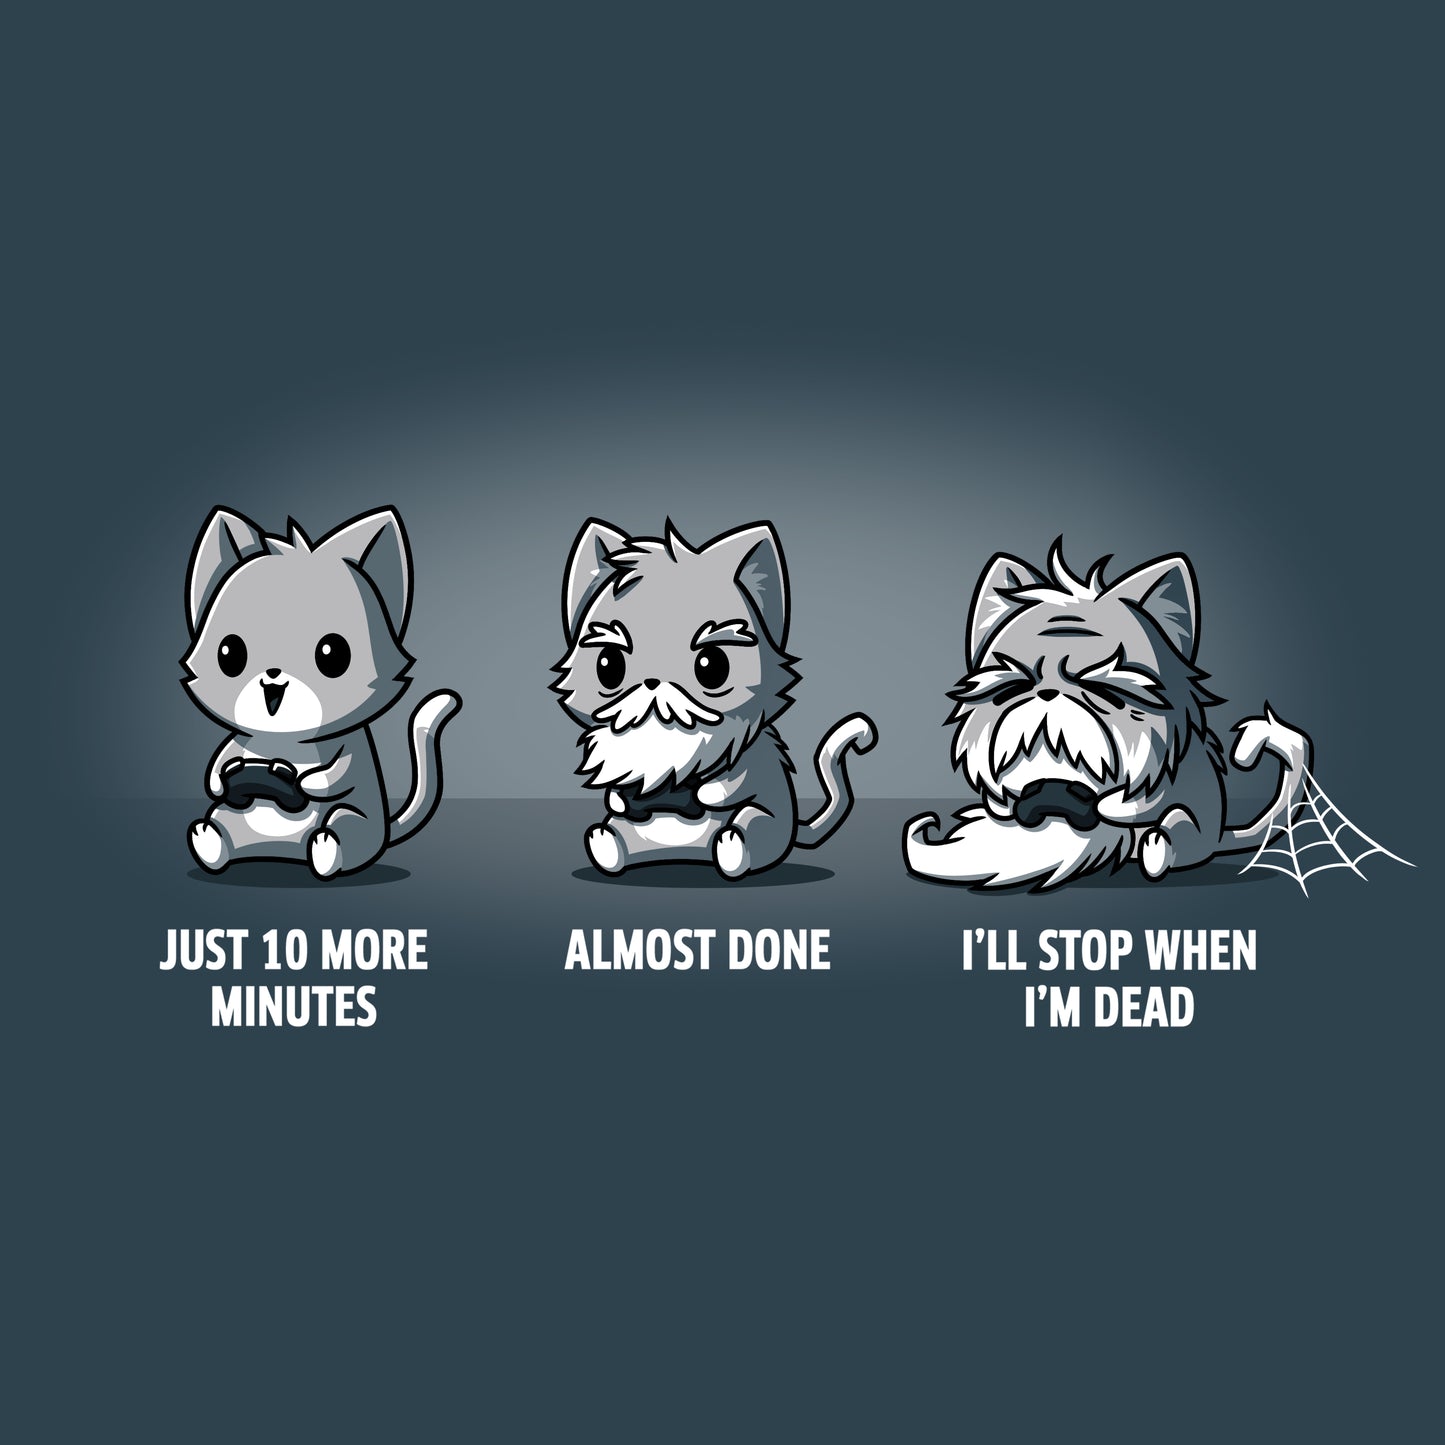 A group of cats wearing denim blue T-shirts expressing TeeTurtle's product "The Gamer's Lie" - "i'm dead i'm dead i'm dead i'm dead i.